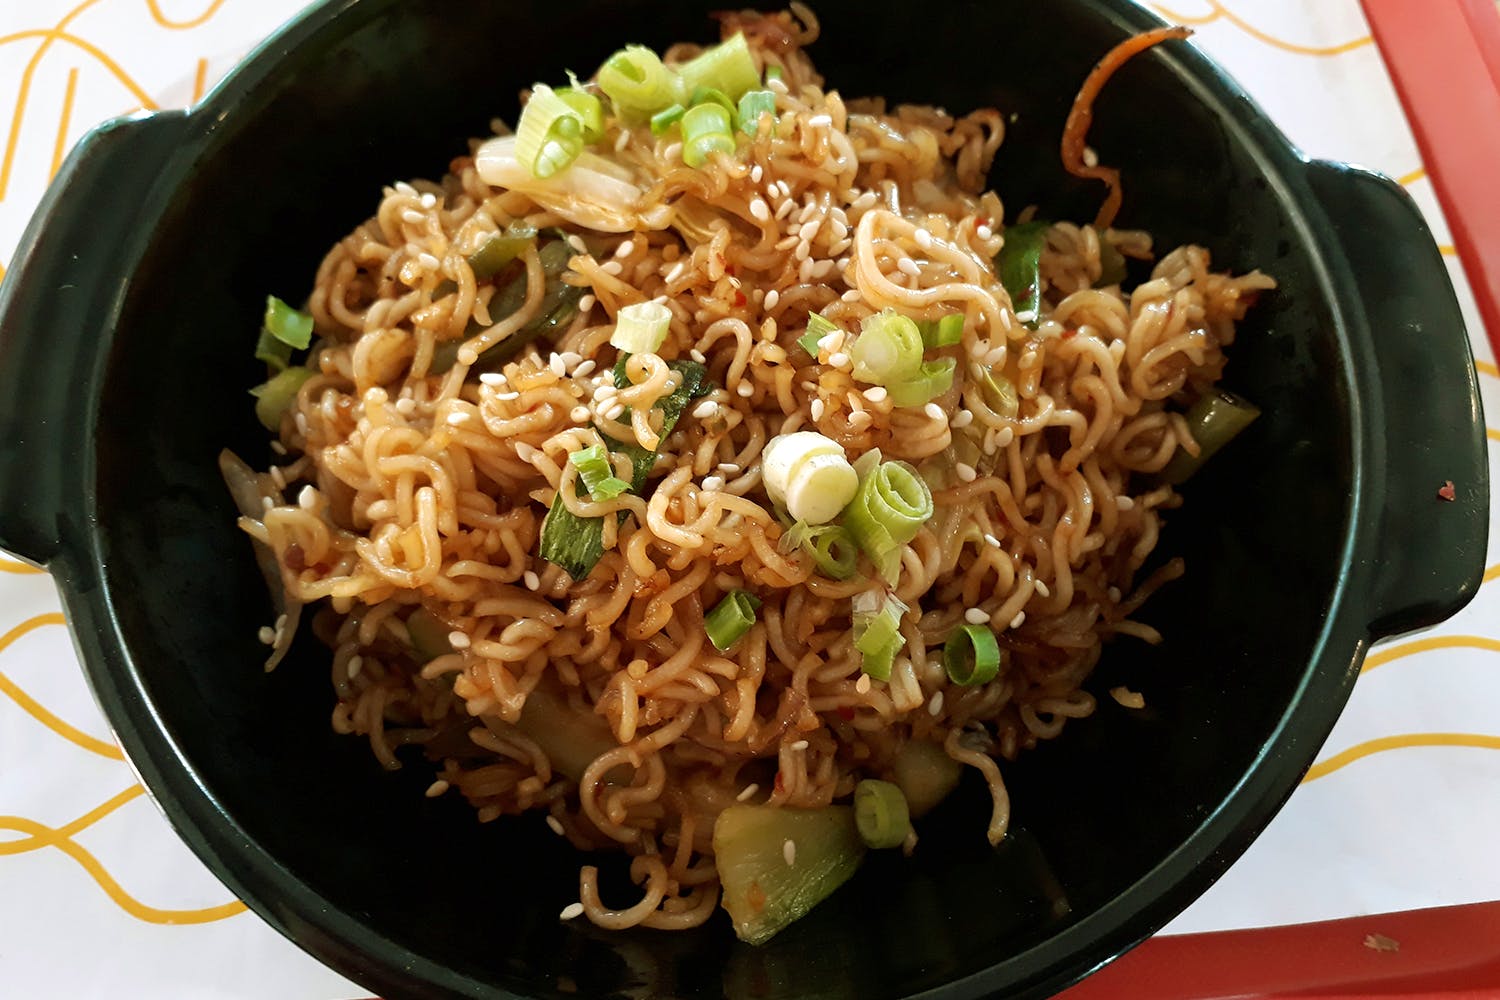 Dish,Cuisine,Food,Ingredient,Produce,Recipe,Yakisoba,Instant noodles,Chinese noodles,Thai food